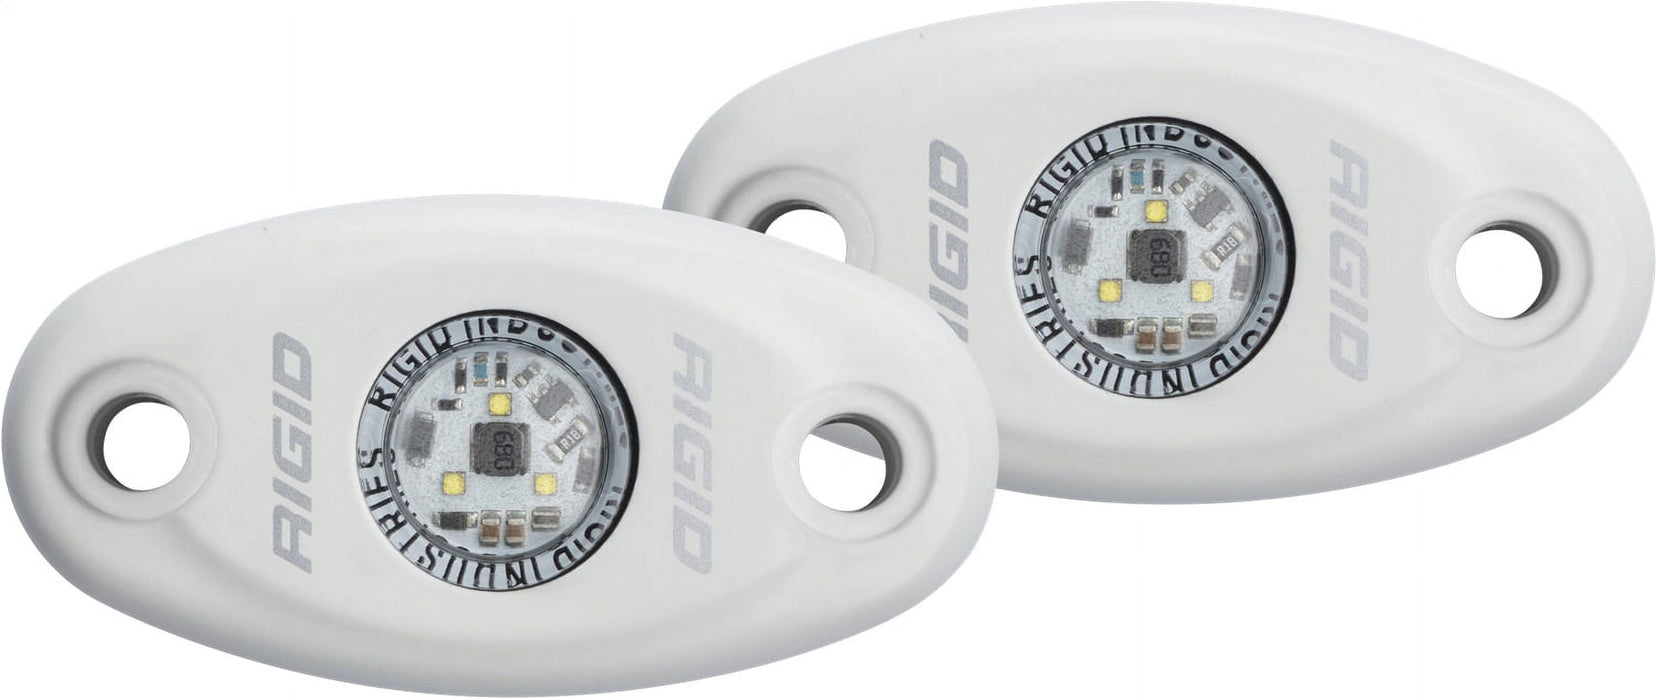 Rigid Industries A-Series Light - White - Low Strength - Cool White - Set of 2